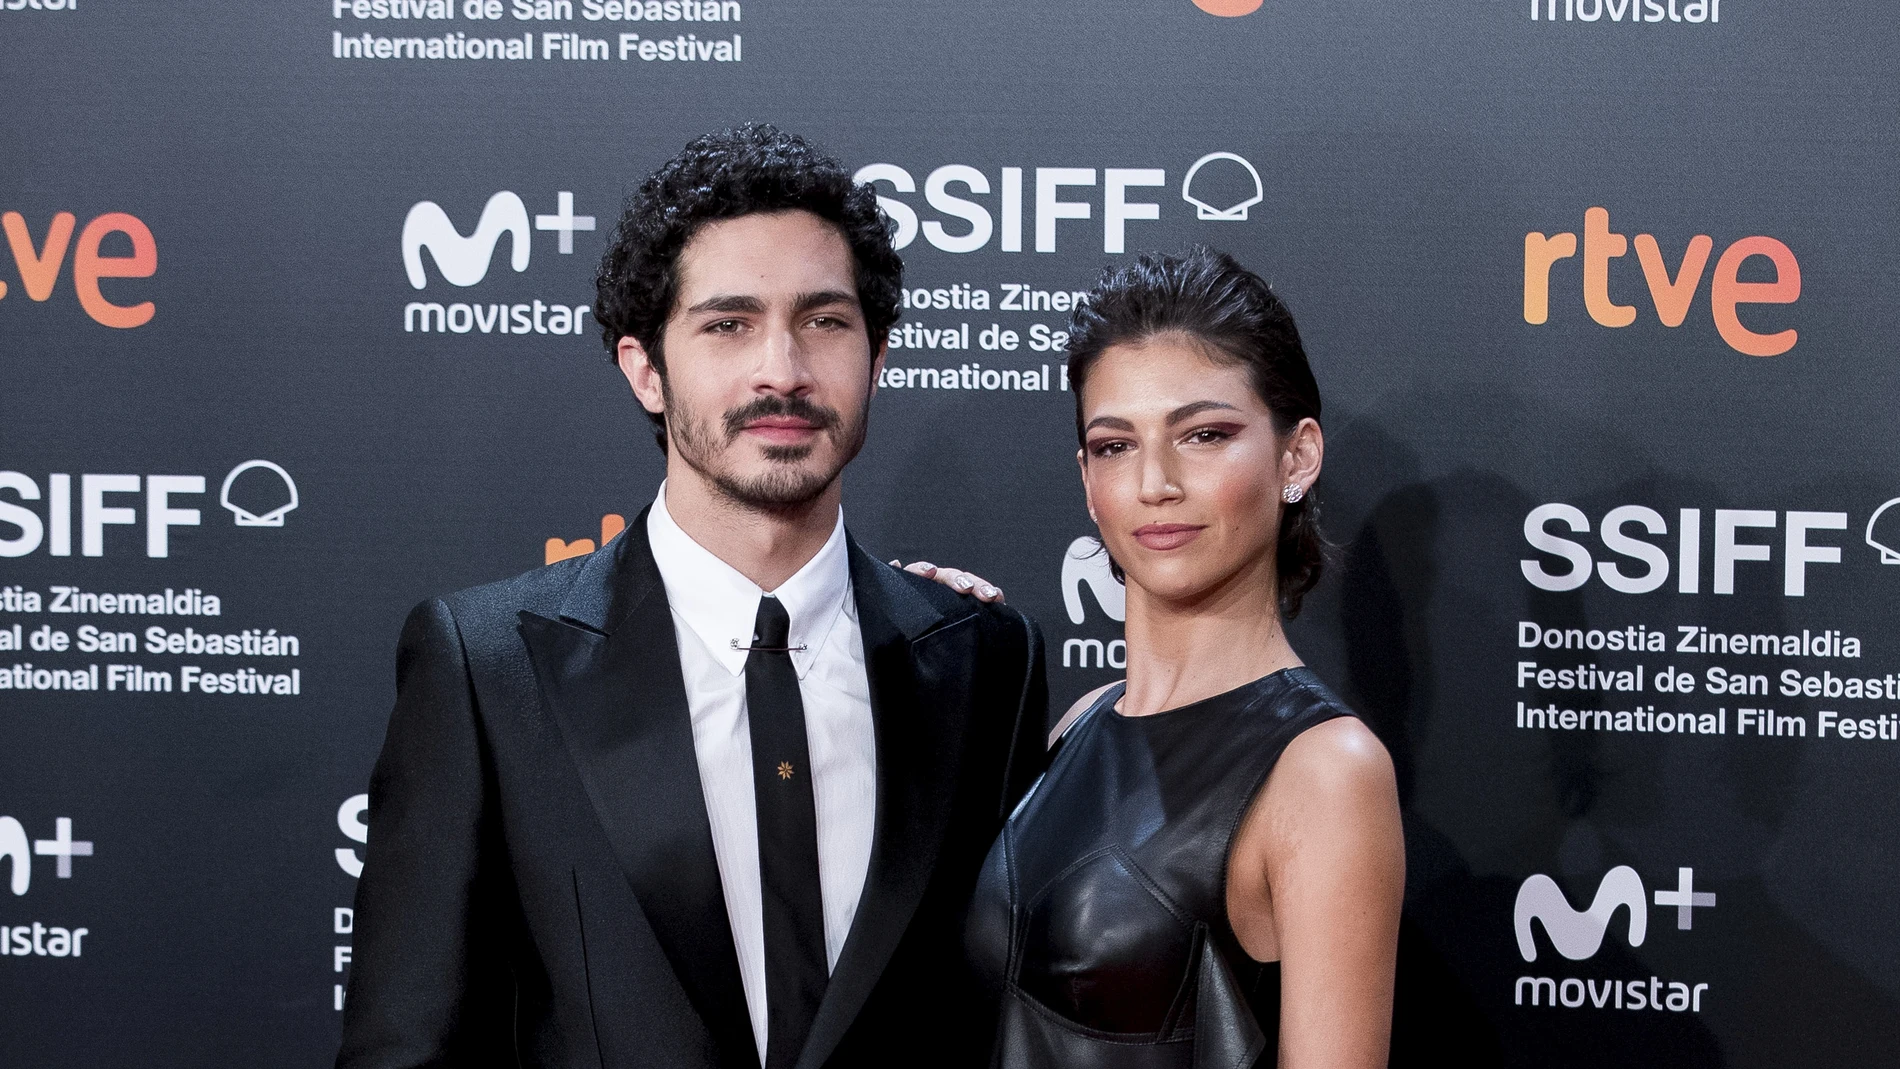 Actors Chino Darin and Ursula Corbero at the openning ceremony during the 66th San Sebastian Film Festival in San Sebastian, Spain, on Friday, 21 September, 2018.